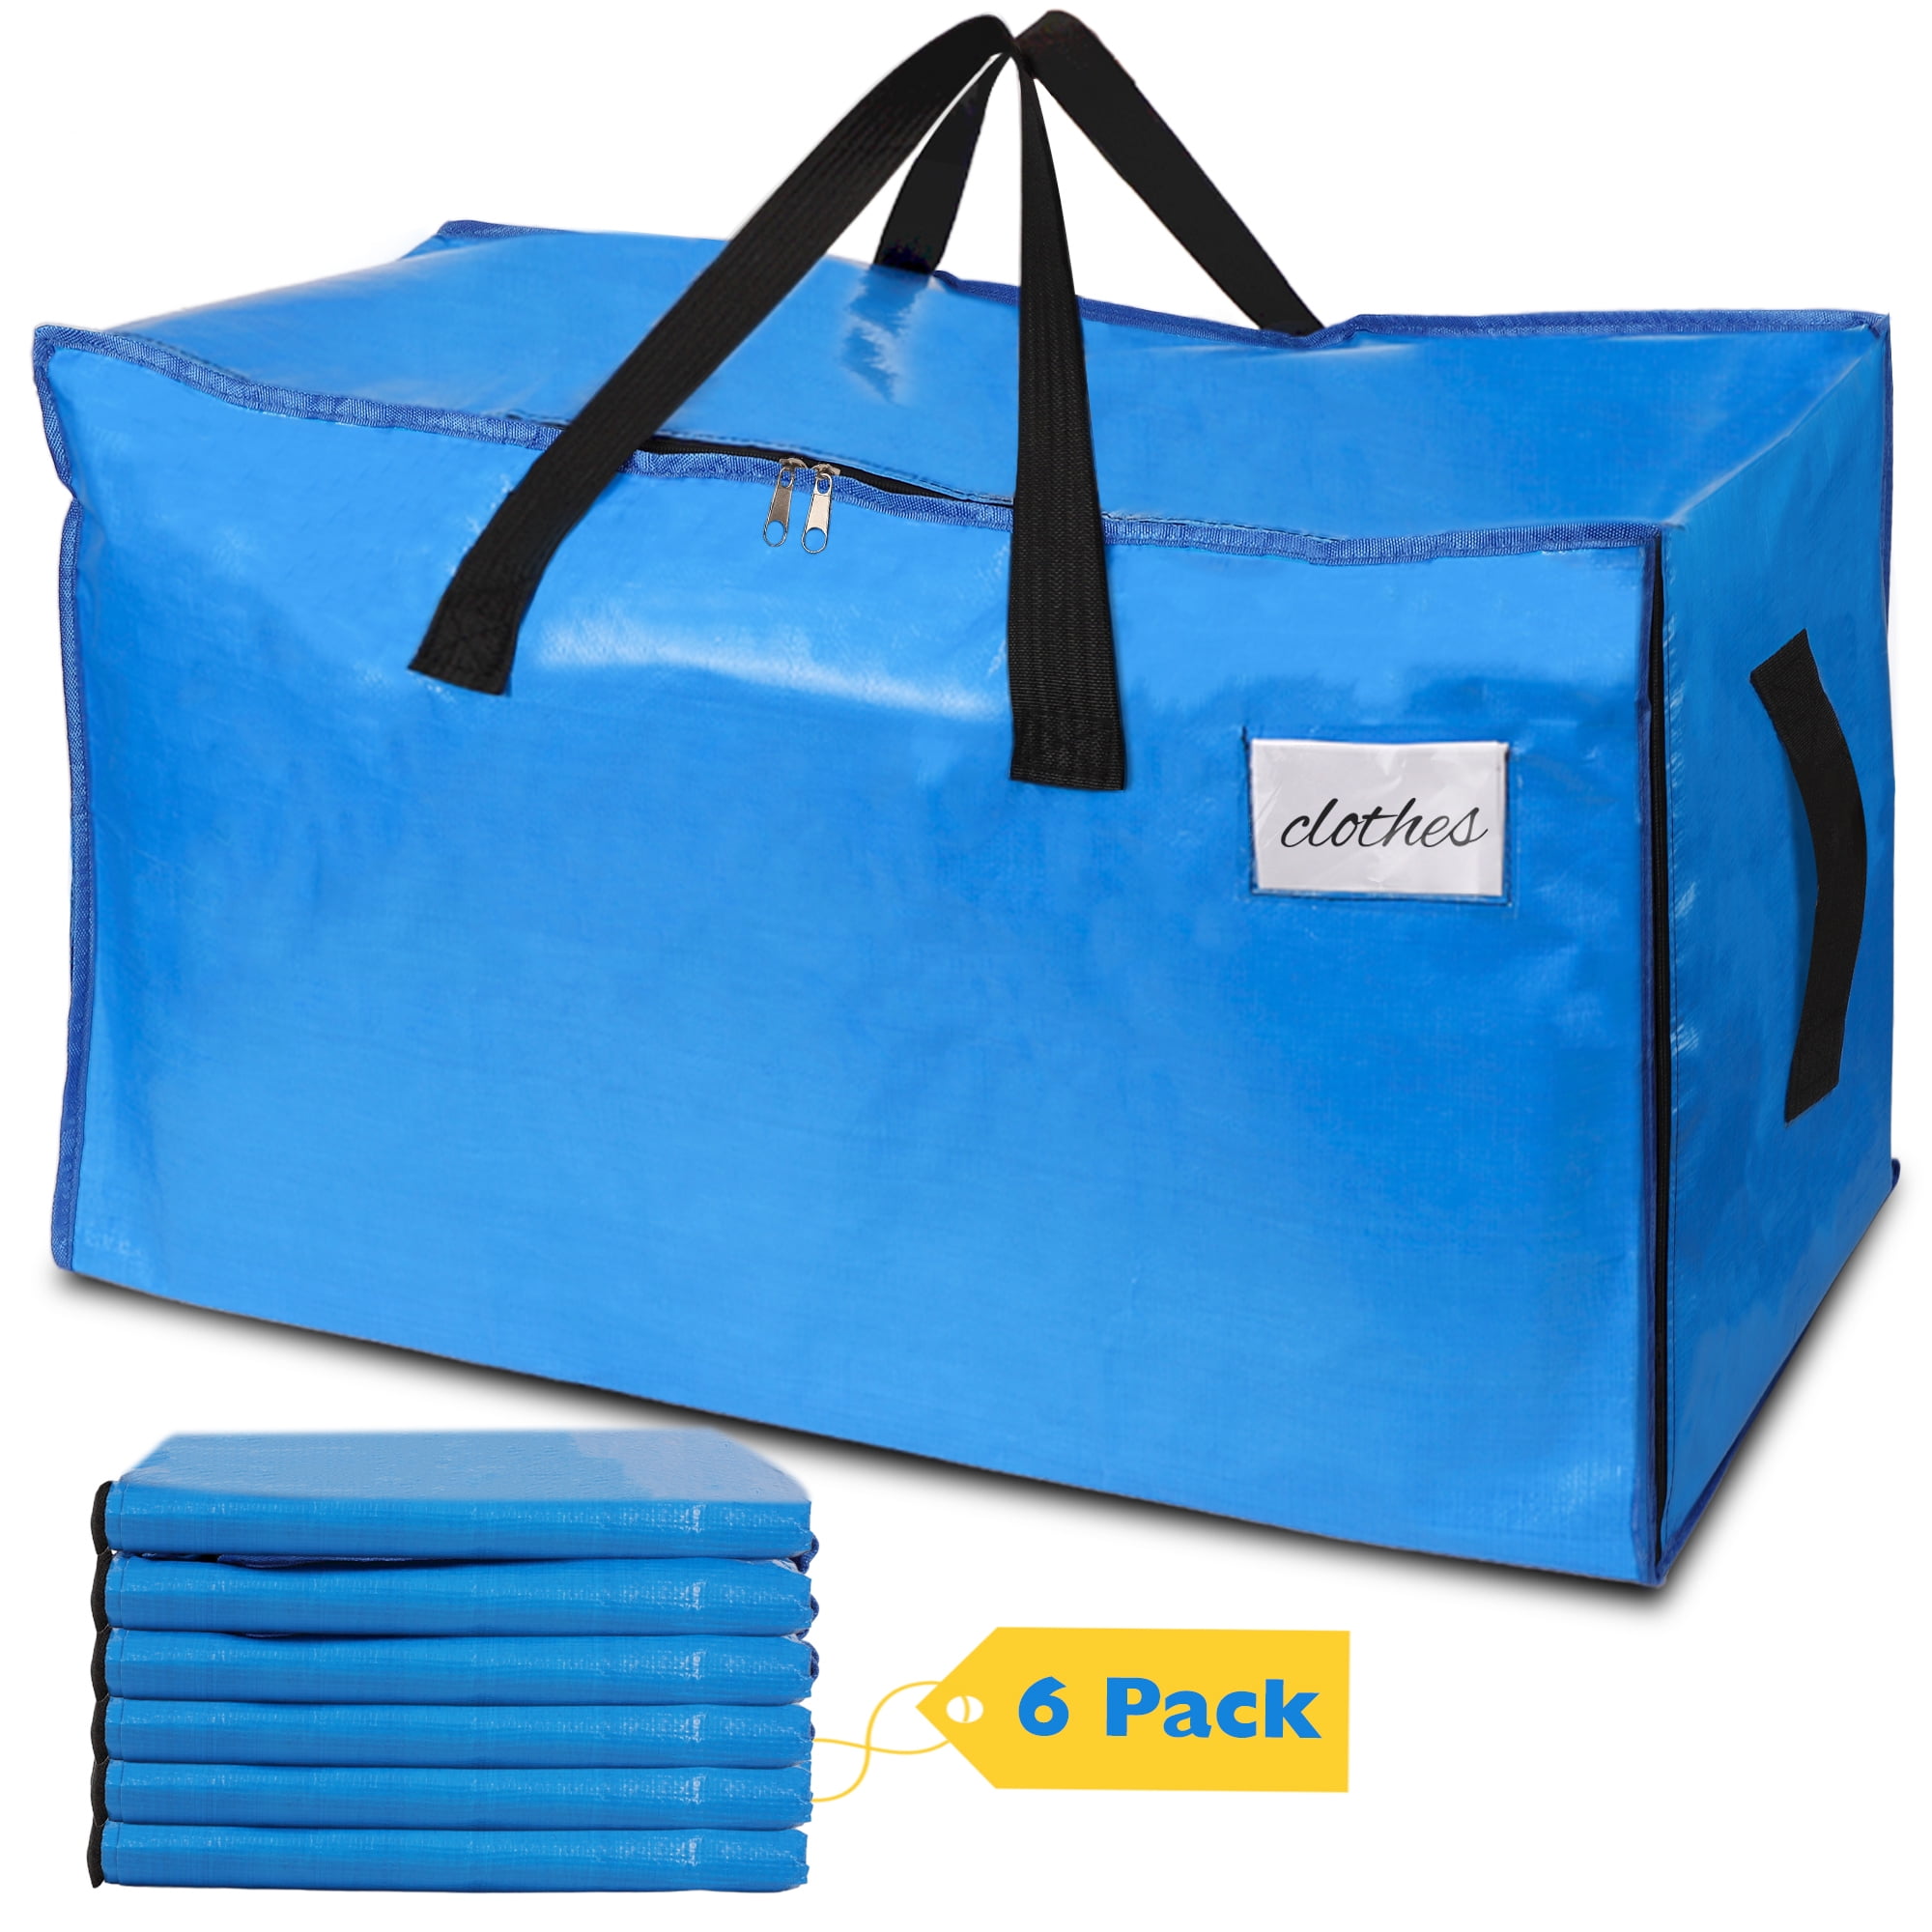 Nefoso Storage Moving Bags, 6Pcs Large Storage Bags for Clothes